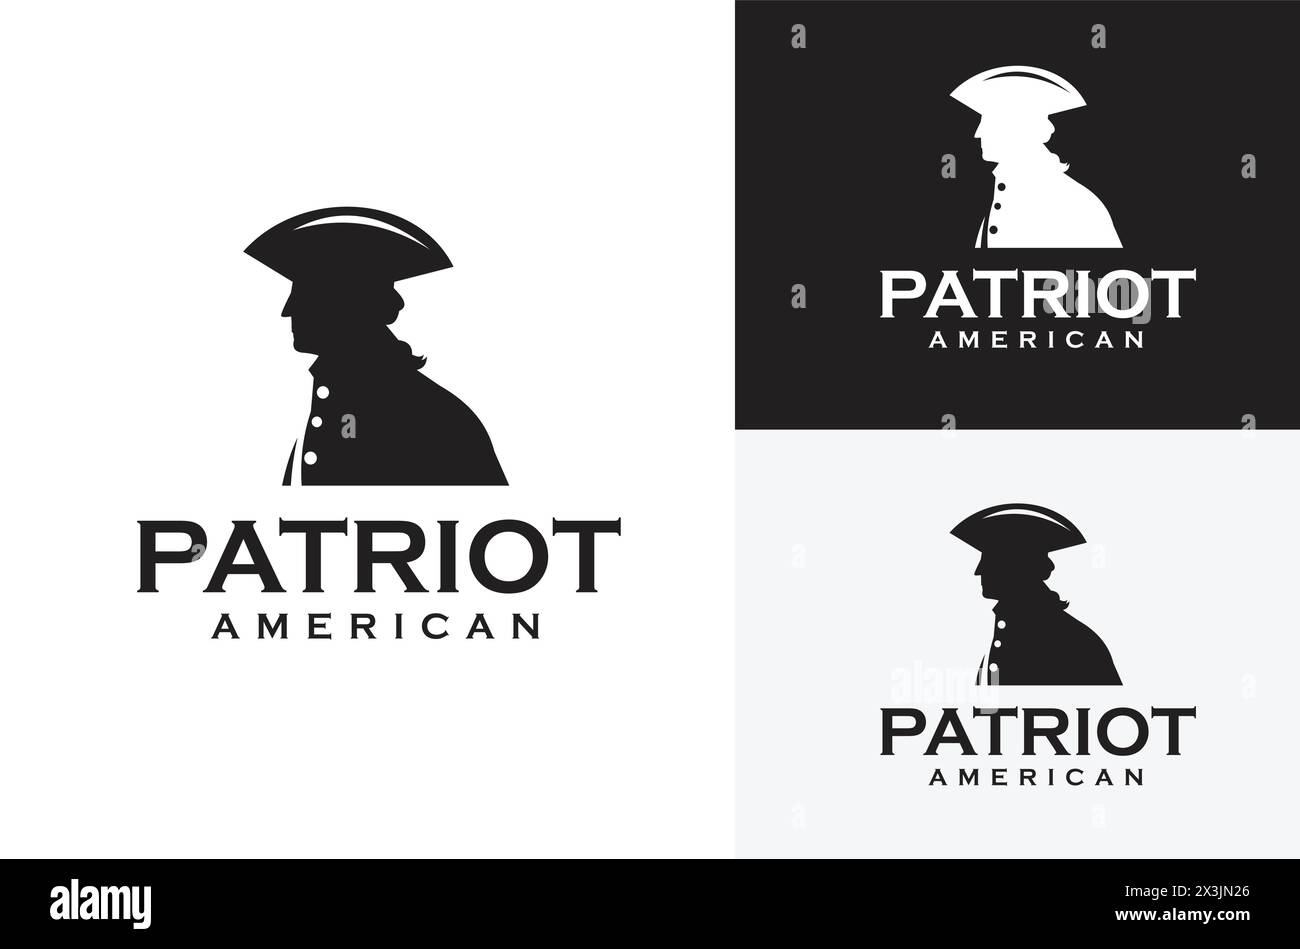 Classic American Patriot Silhouette Facing. United States Revolutionary War Army Soldier Vintage Illustration Design on black white background Stock Vector